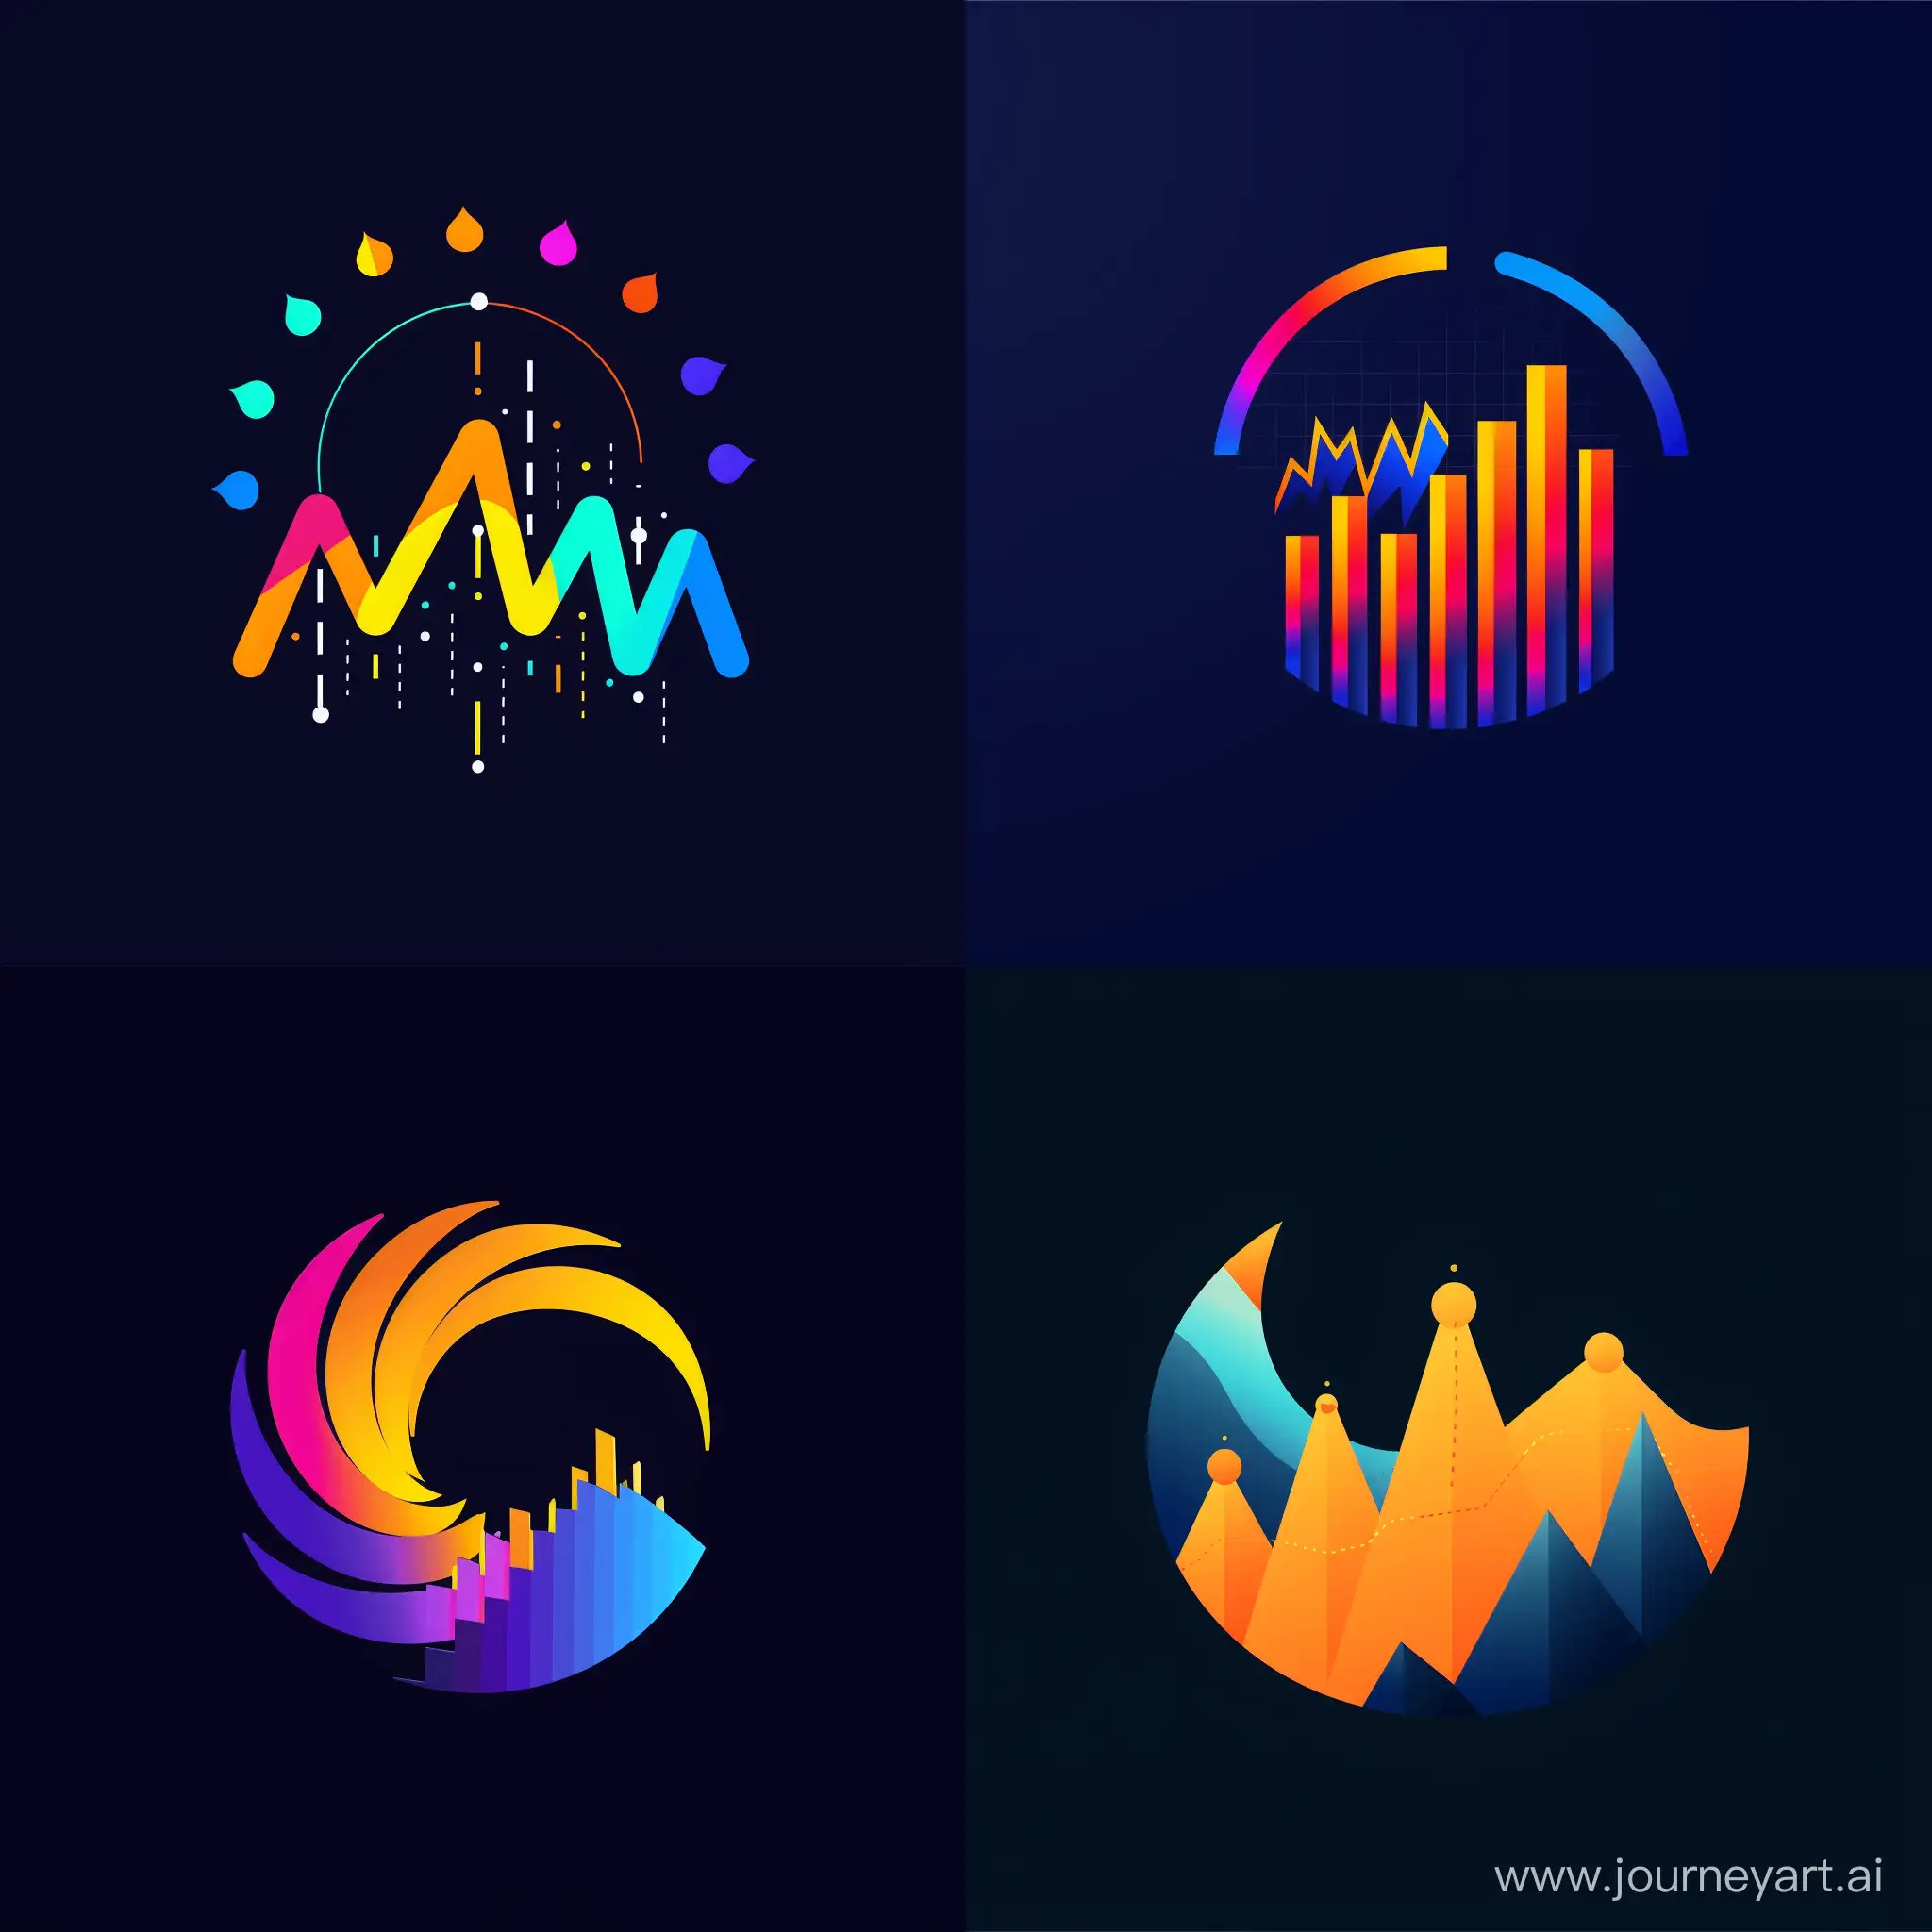  logo for the programme, bright, noticeable and recognisable, theme - stock portfolio management, money, charts , something related to stock exchange and stocks, catchy, original, recognisable, memorable